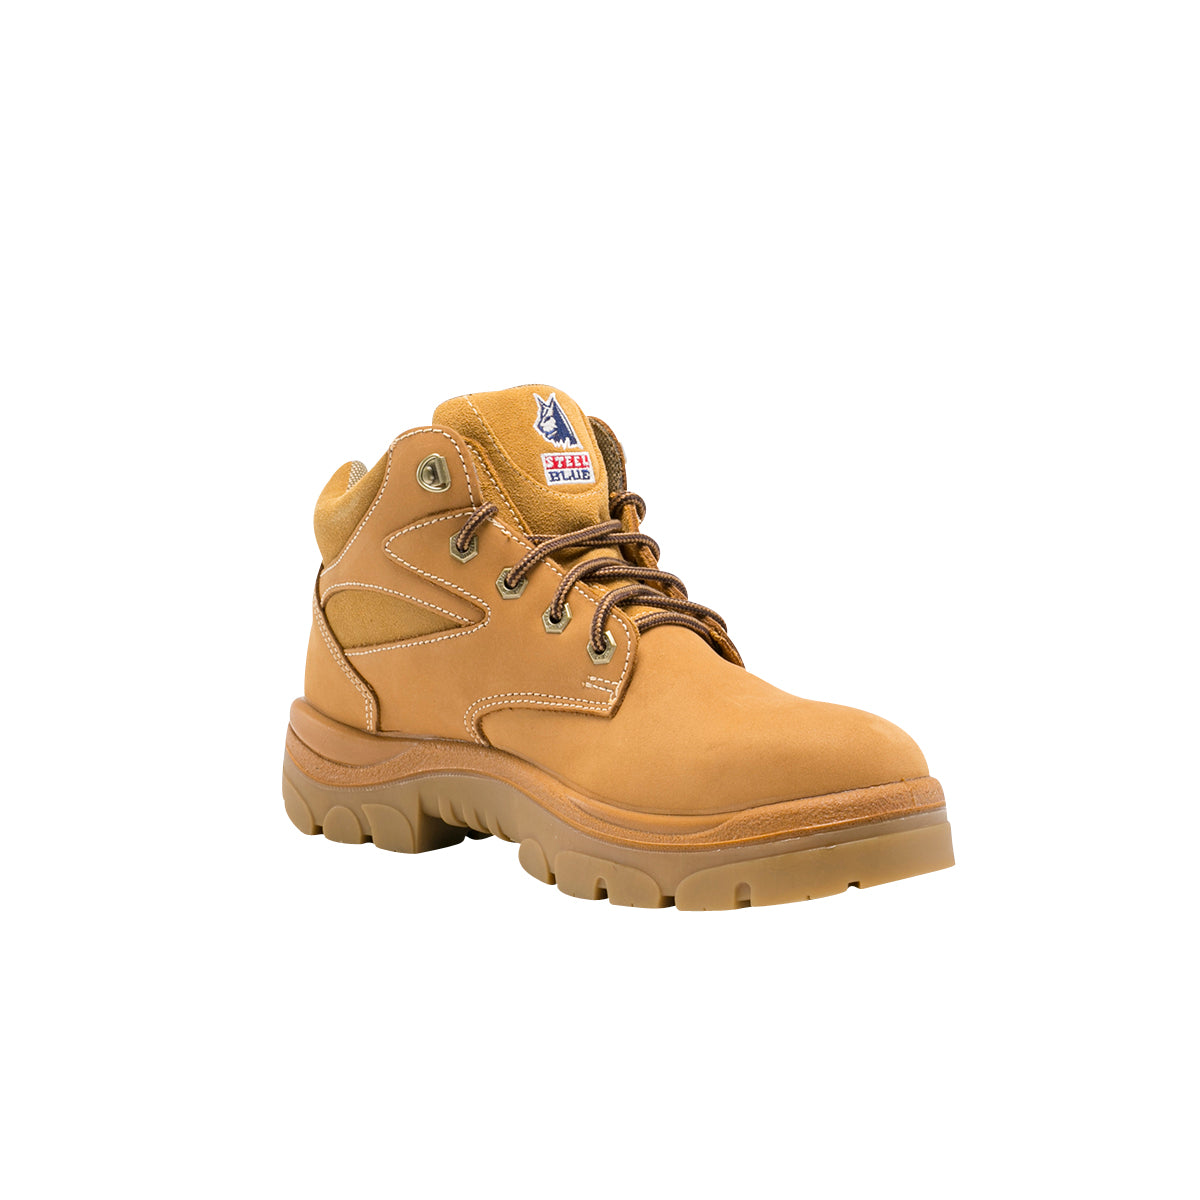 STEEL BLUE 312108 WHYALLA SAFETY BOOTS